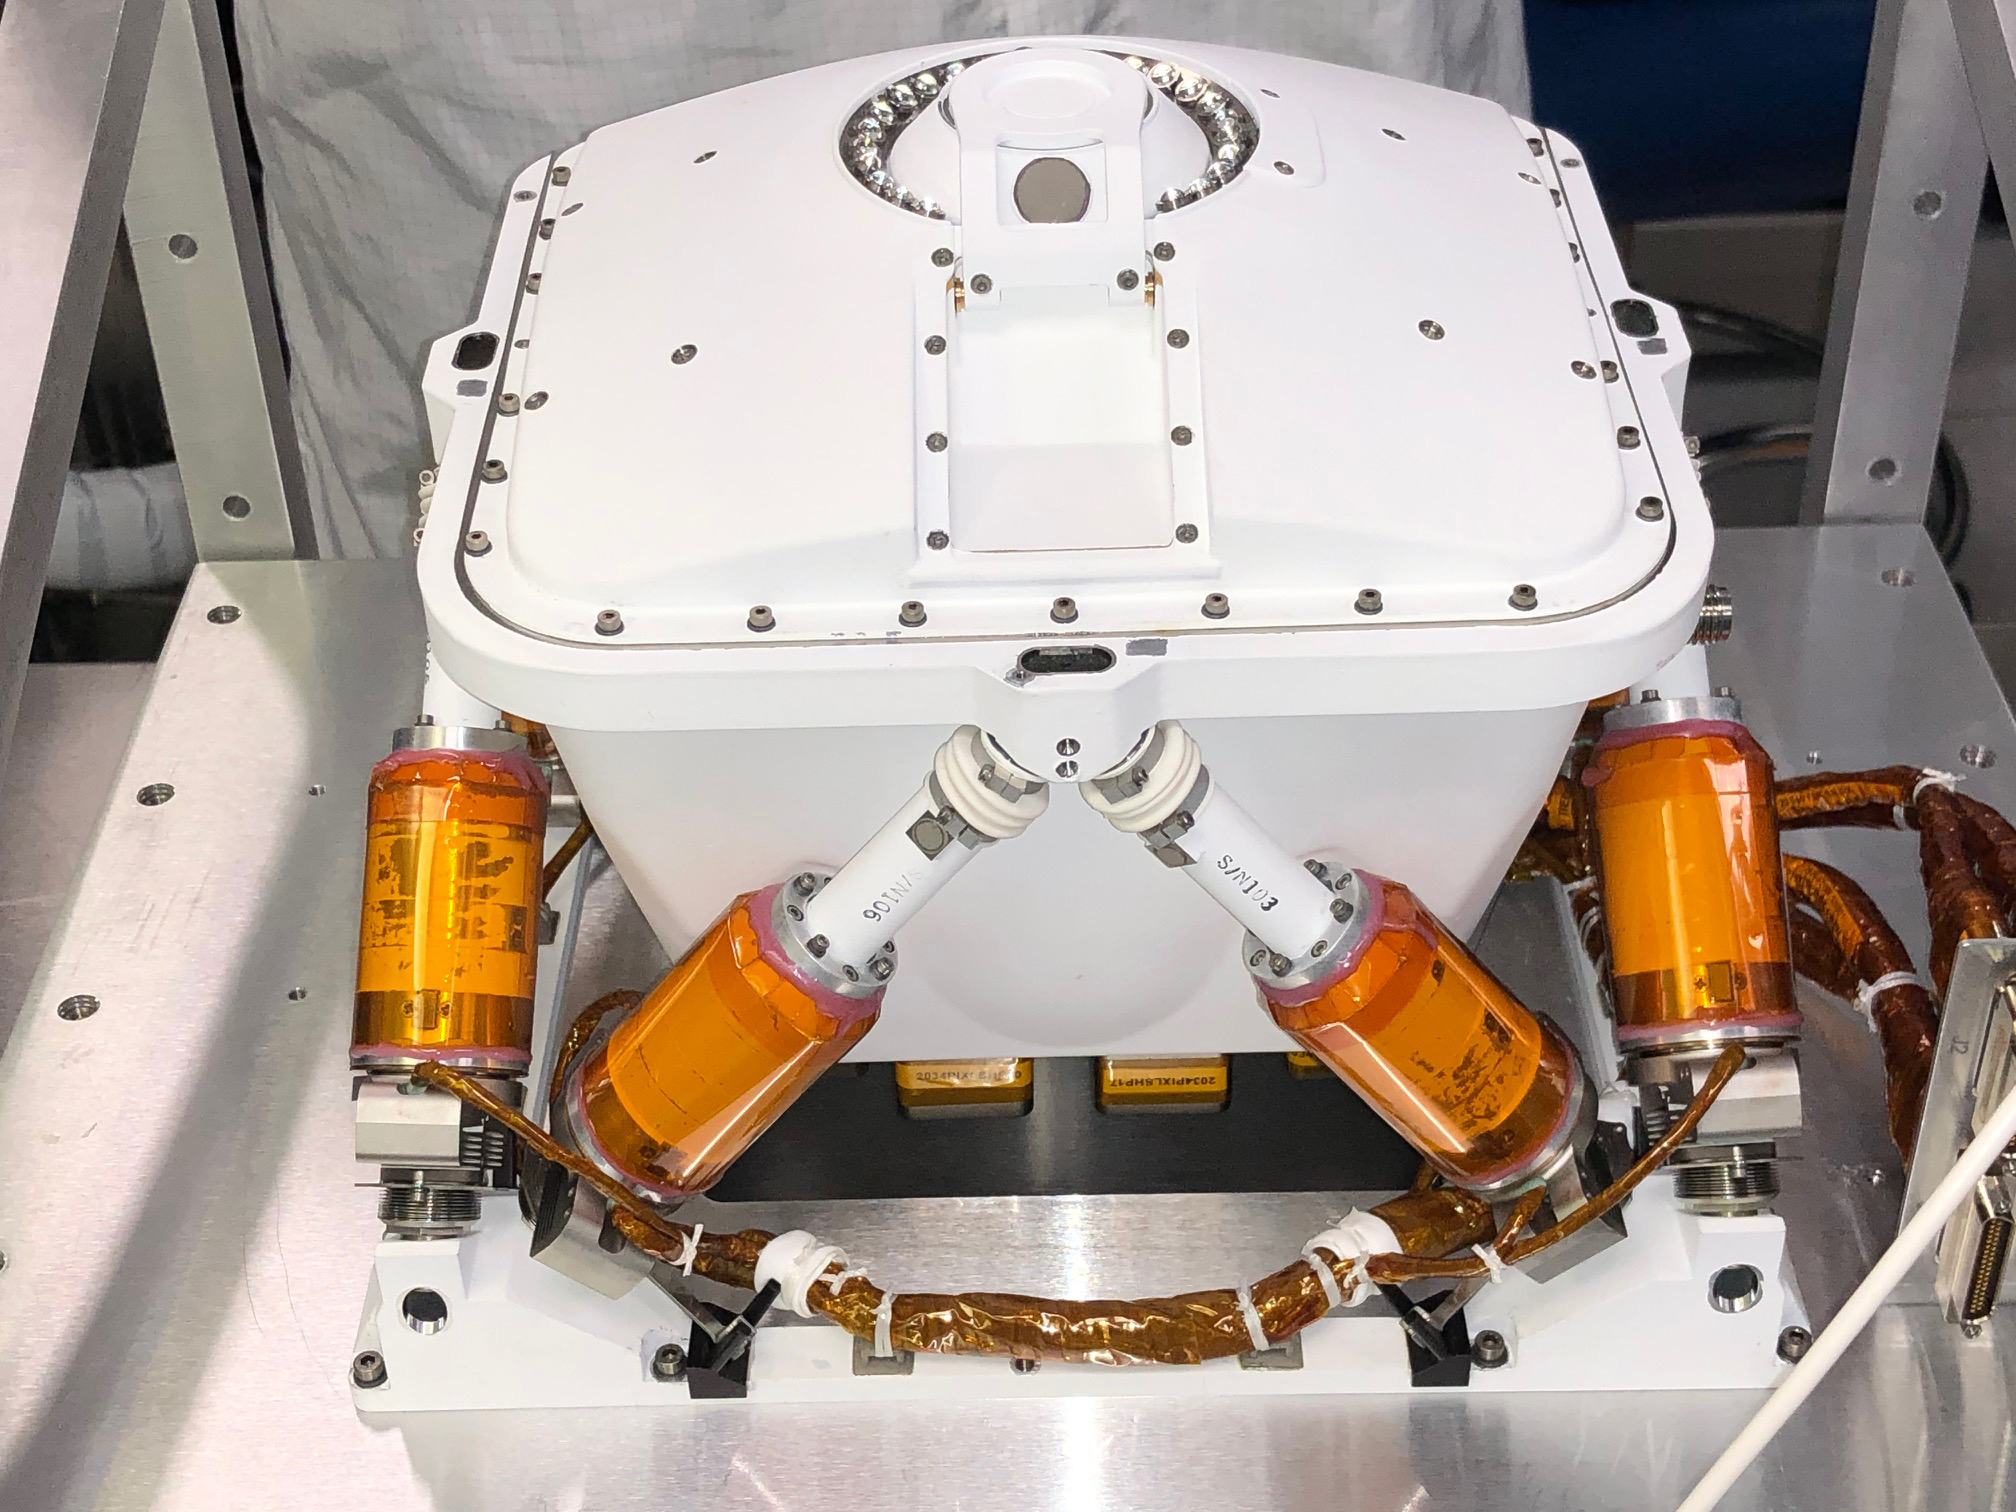 PIXL's sensor head before being integrated with the robotic arm at NASA's Jet Propulsion Laboratory in Pasadena, California.